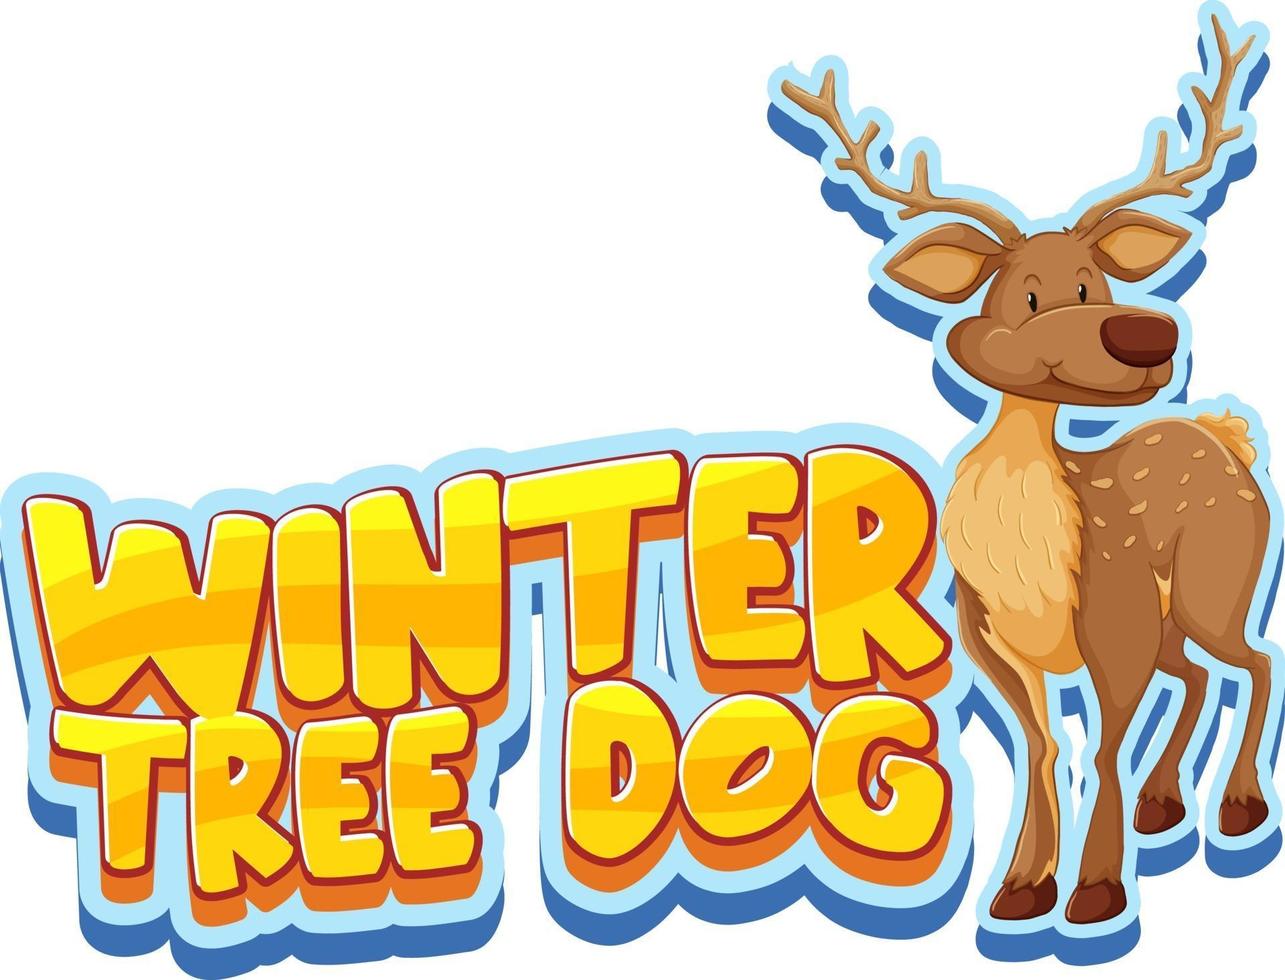 Deer cartoon character with Winter Tree Dog font banner isolated vector